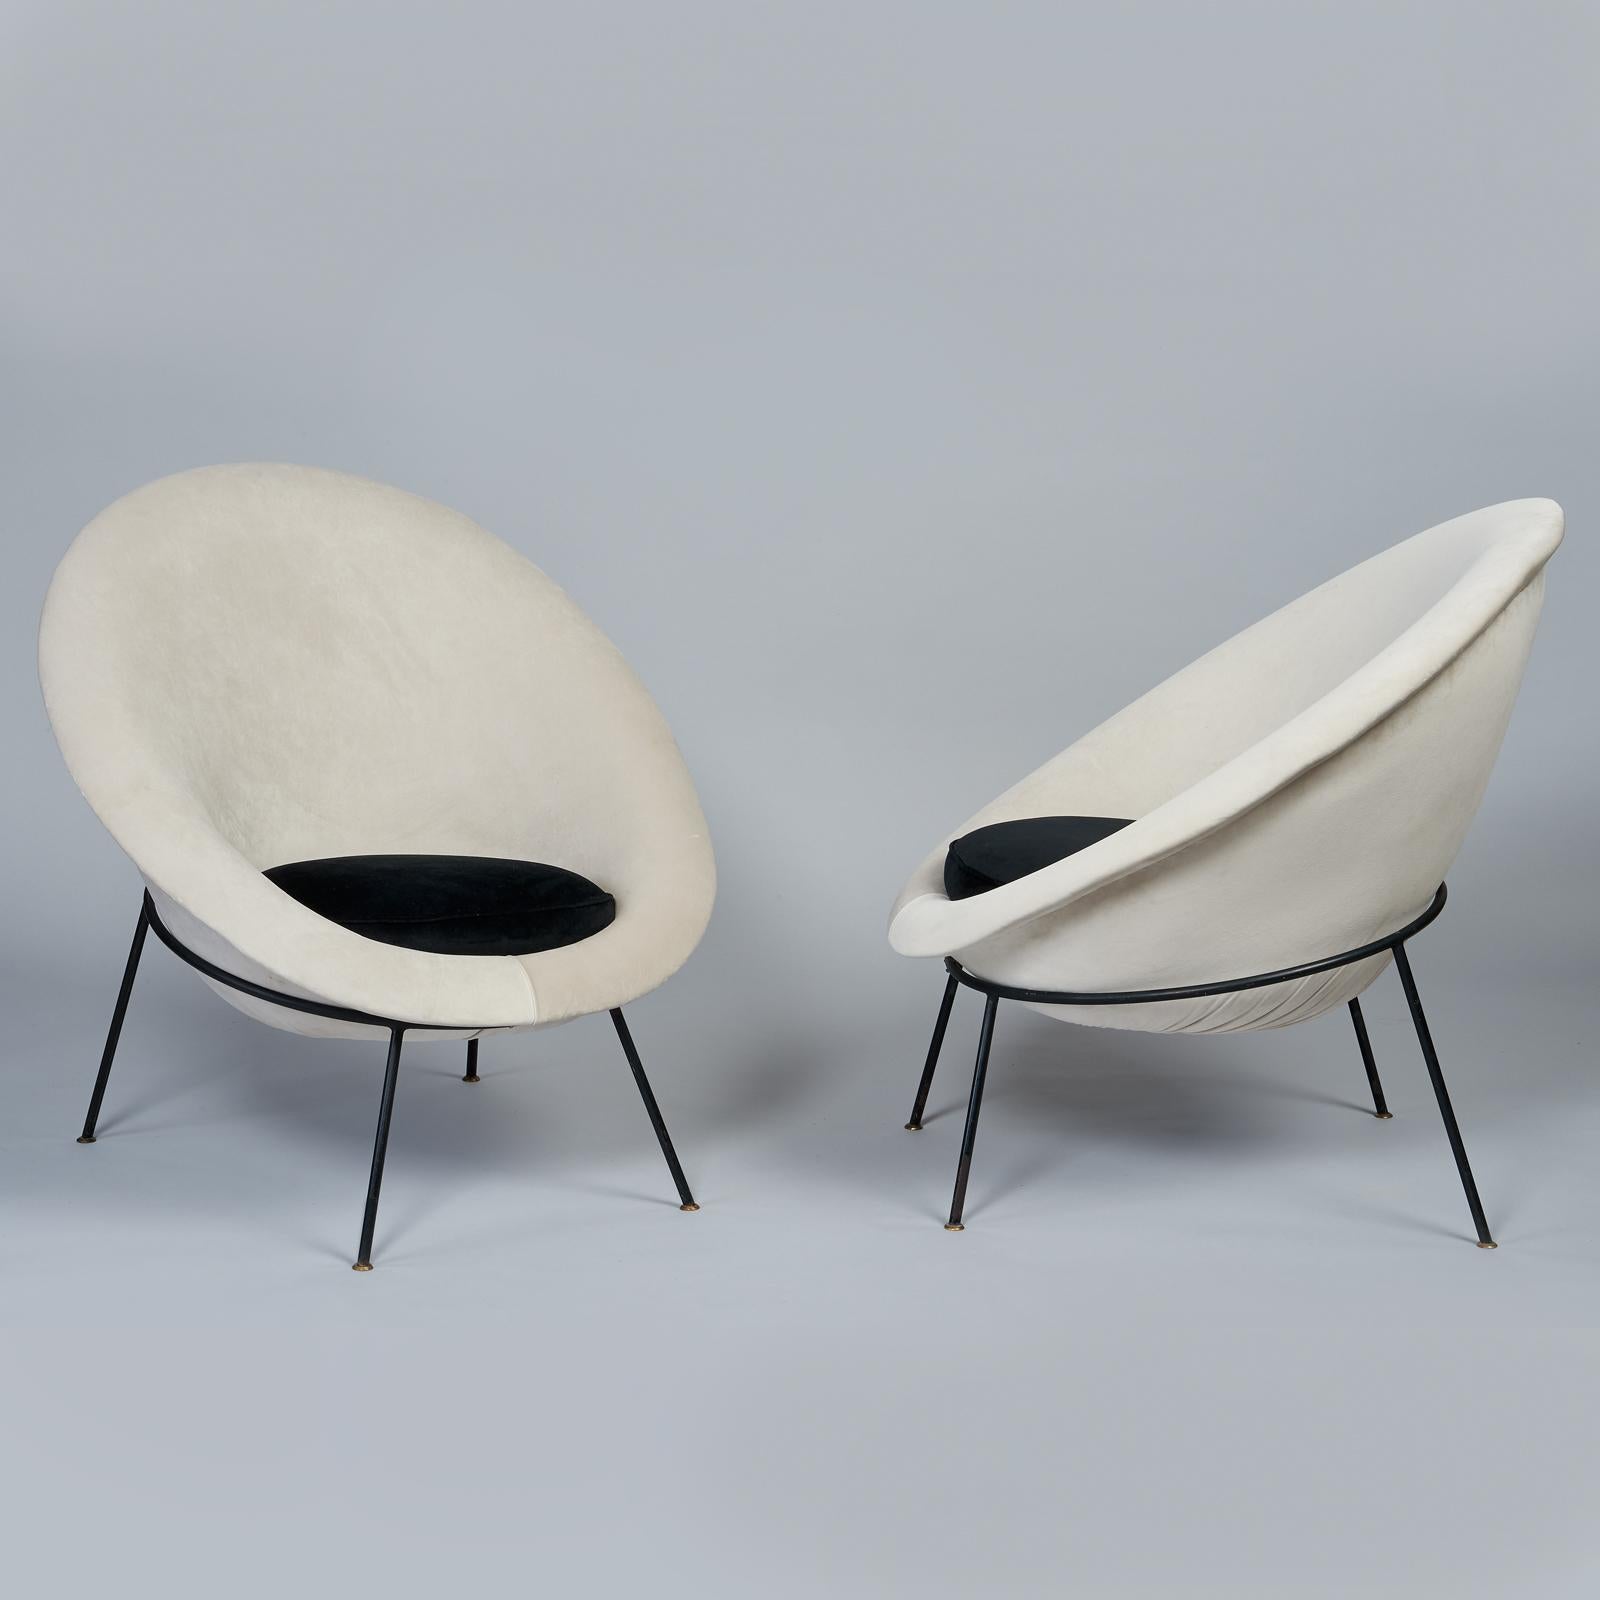 Ico Parisi, att. (1916 - 1996)

A beautiful early pair of modernist Egg lounge chairs attributed to Ico Parisi and manufactured by Ariberto Colombo, upholstered in soft dove grey velvet with black velvet cushions, raised on elegant black lacquered